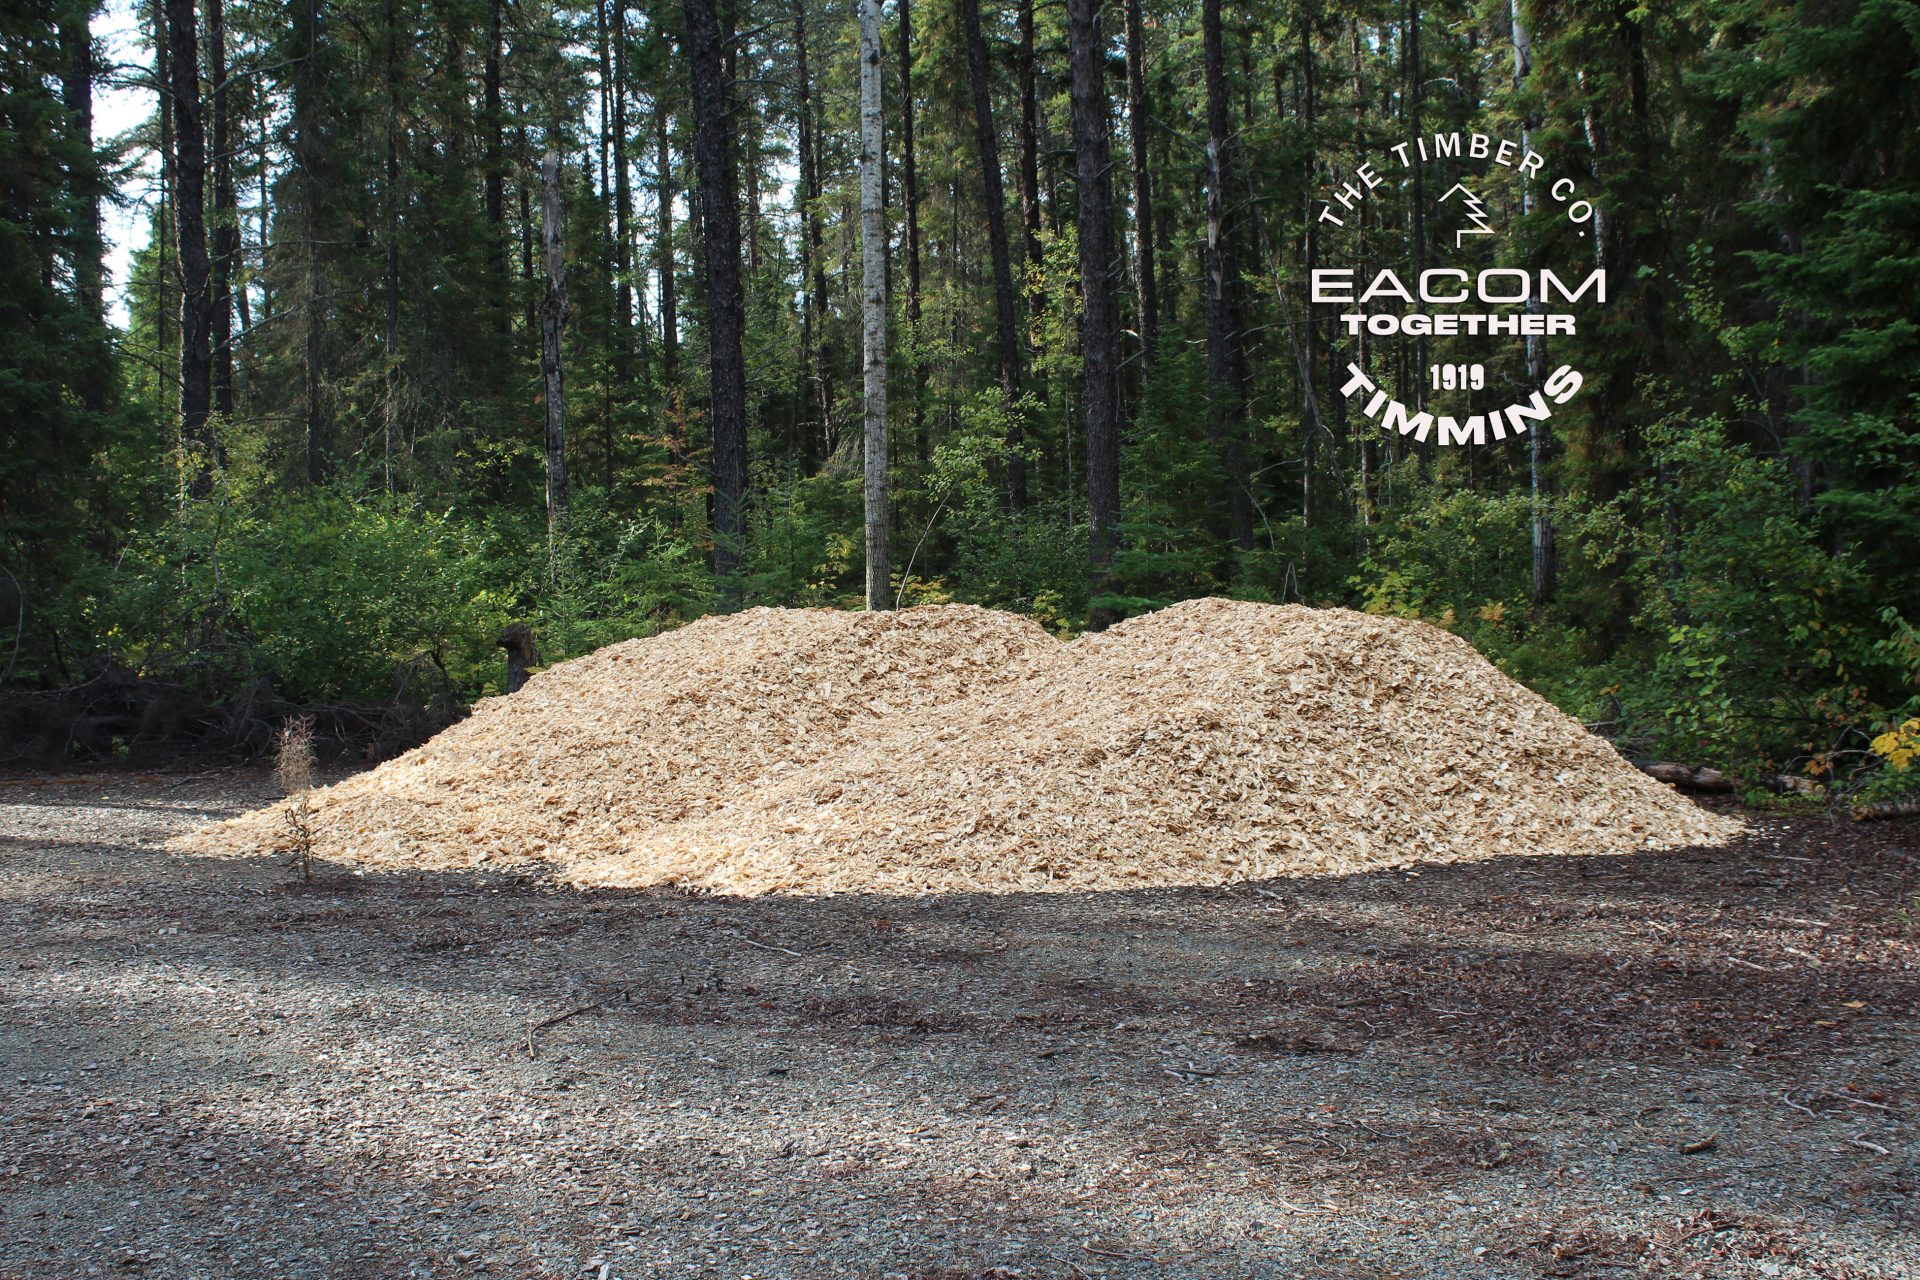 Large pile of woodchips donated by Eacom Timber